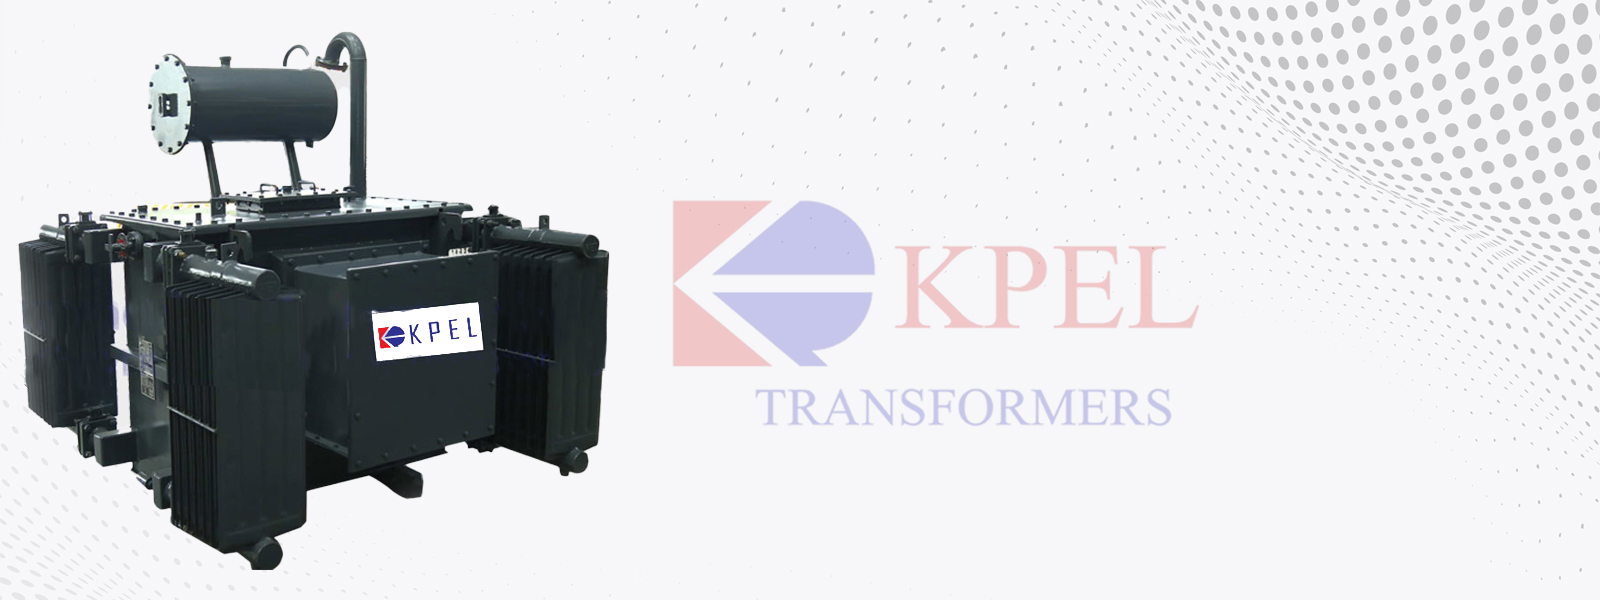 Energy Efficient Transformers Manufacturers in Hyderabad